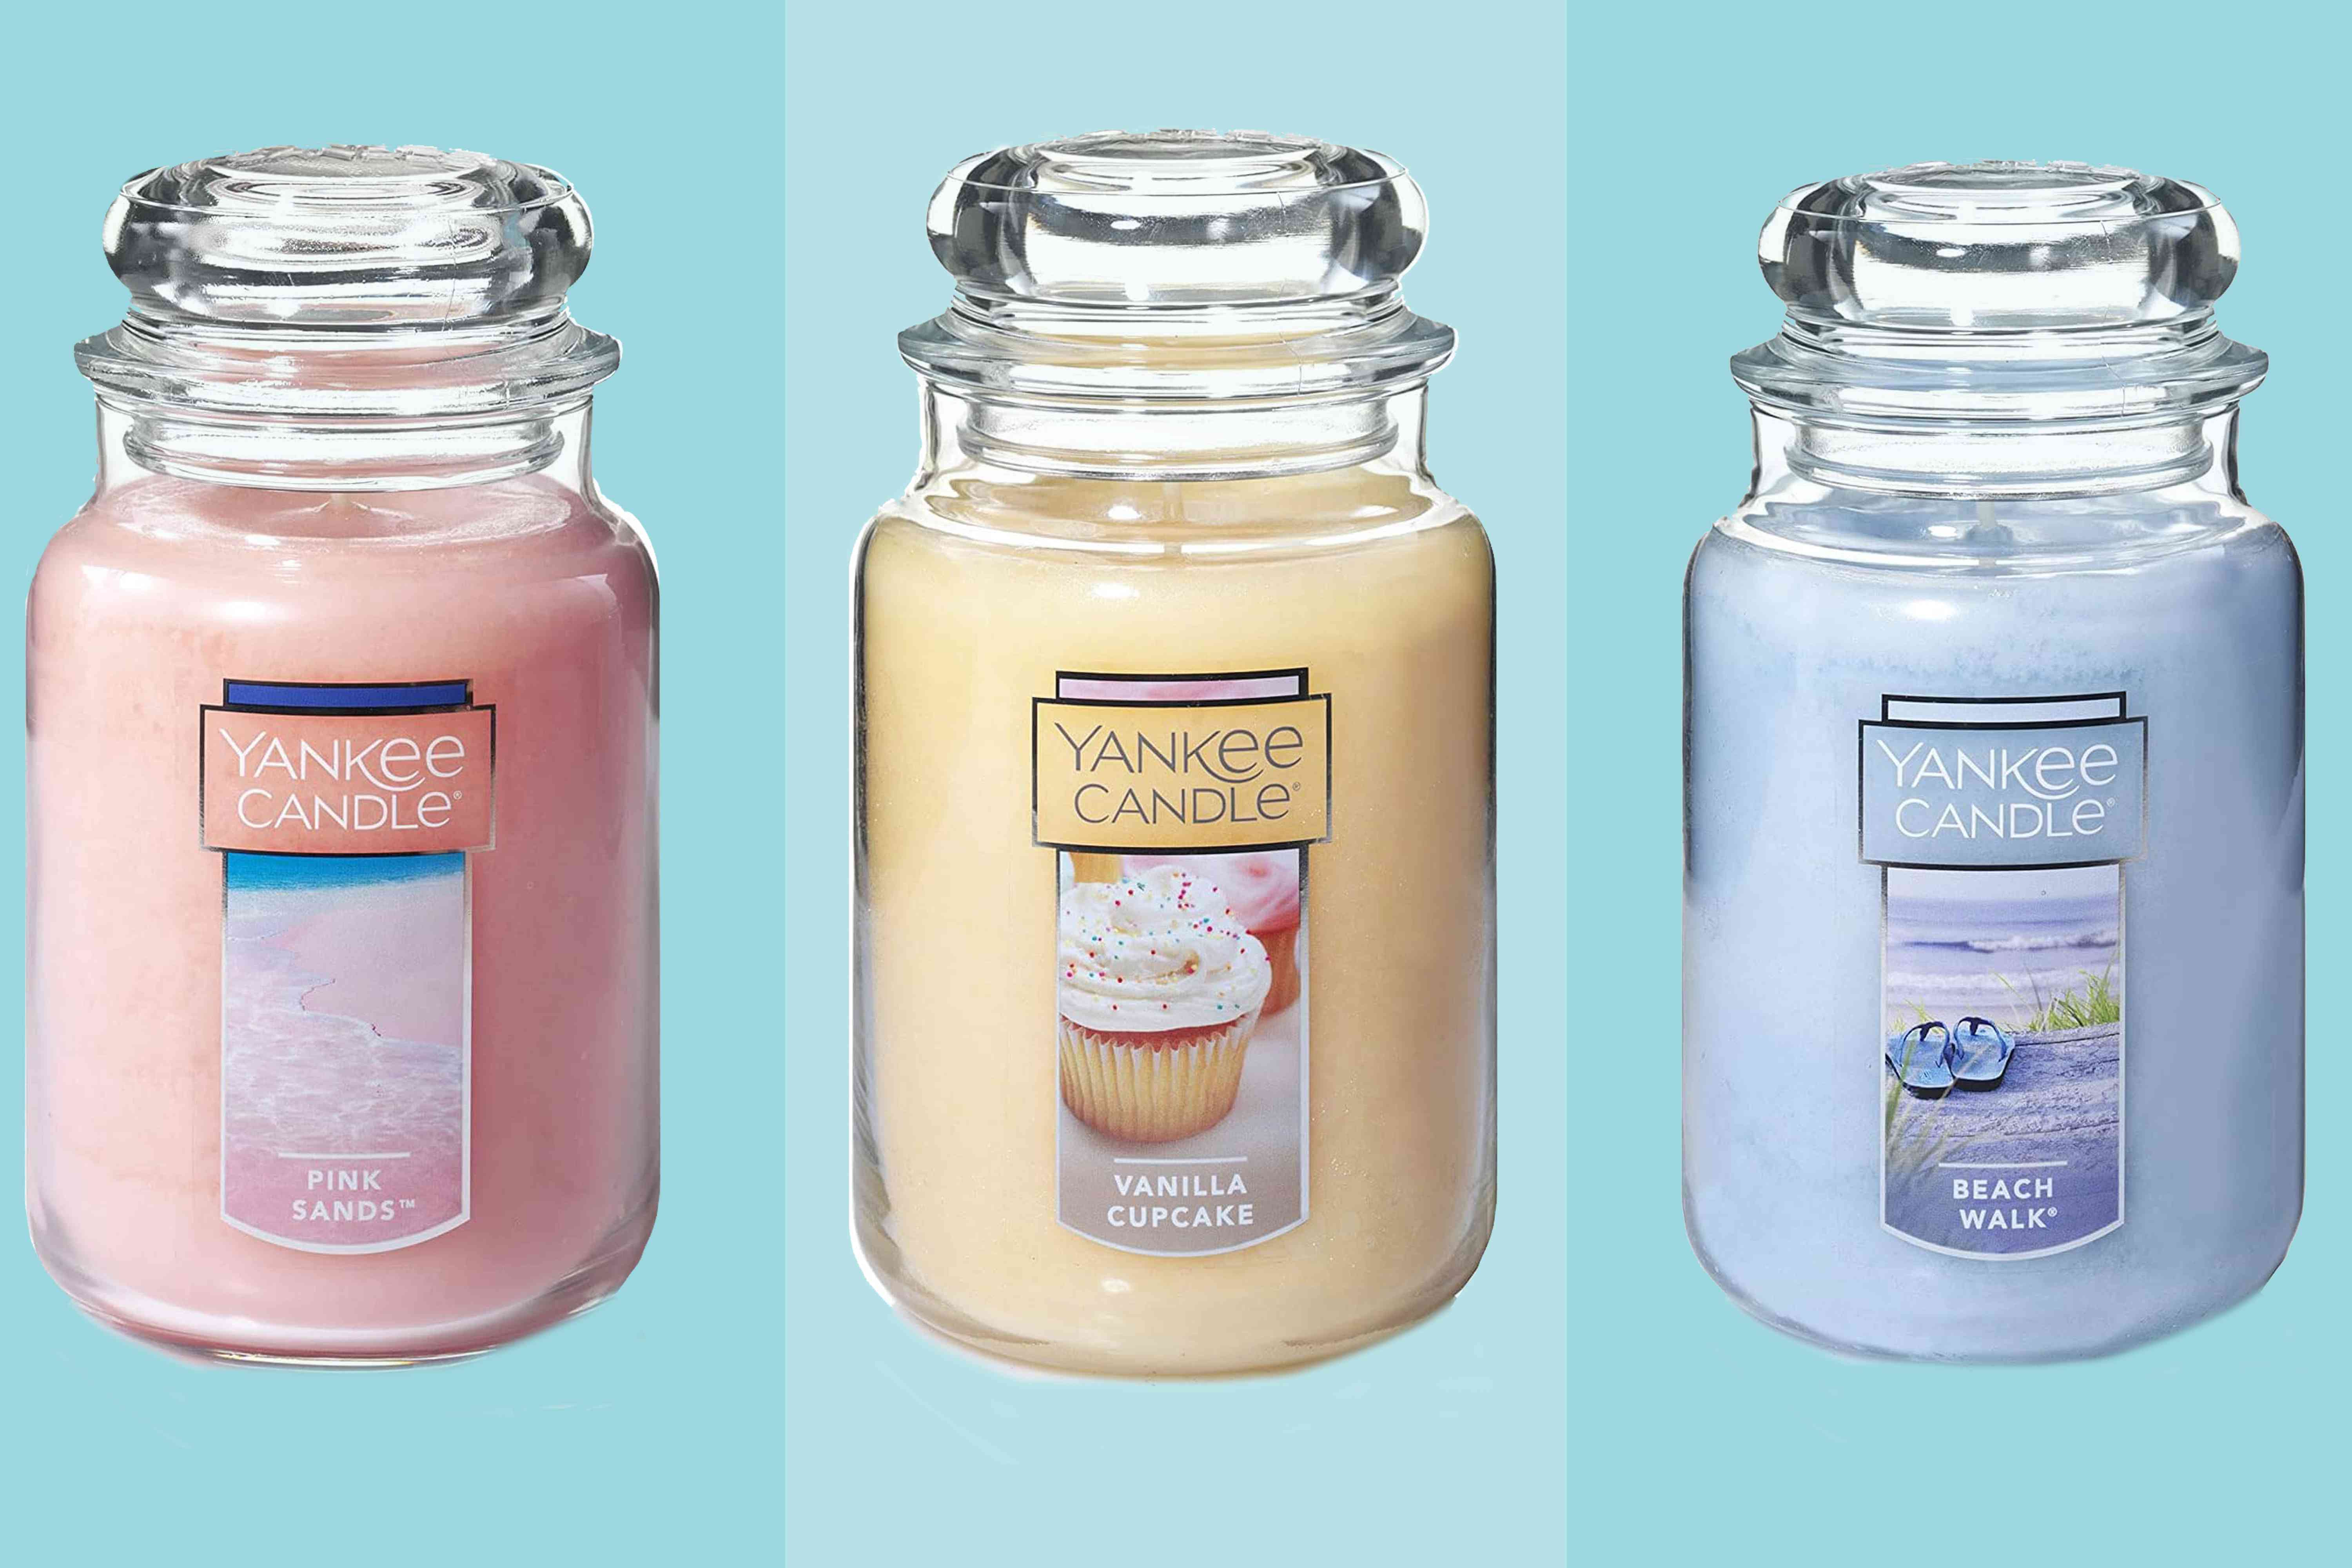 Yankee Candles Are Quietly on Sale for Up to 50% Off at Amazon Today